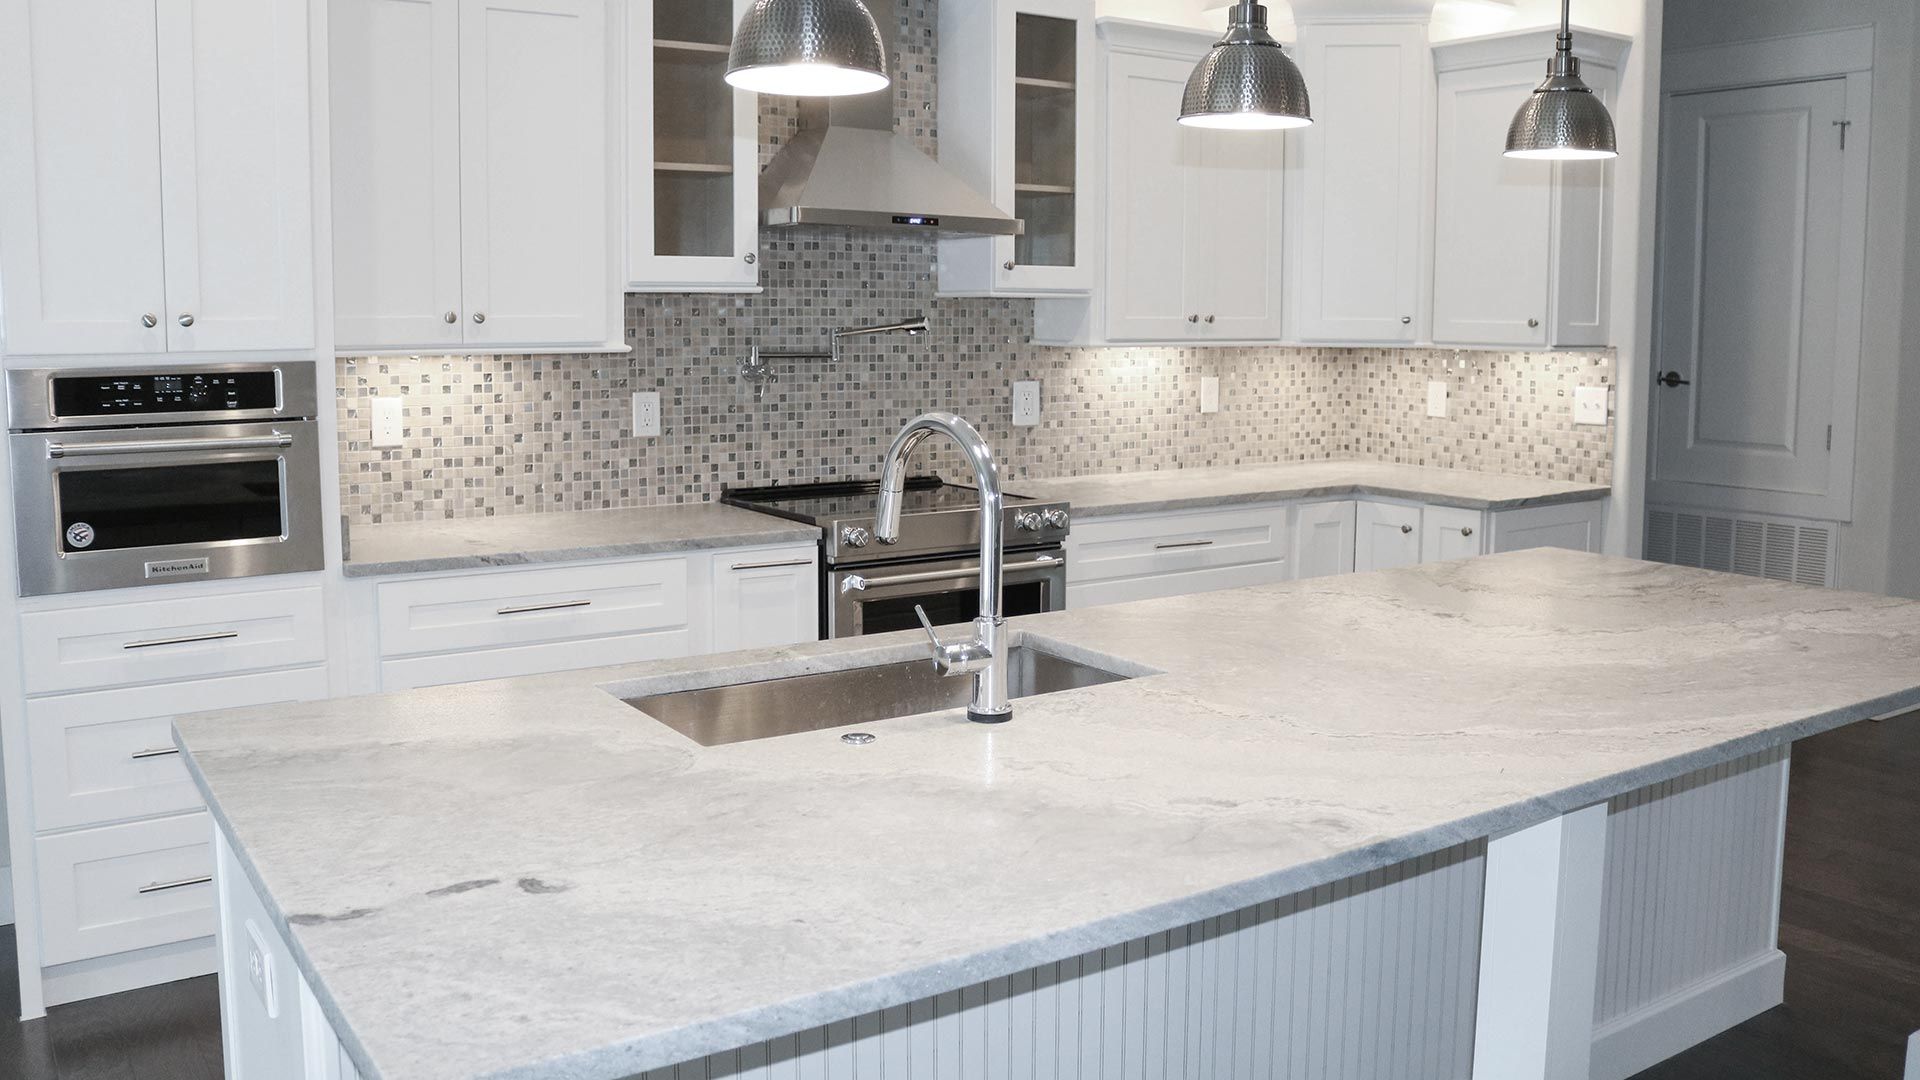 a modern light colored marble countertop